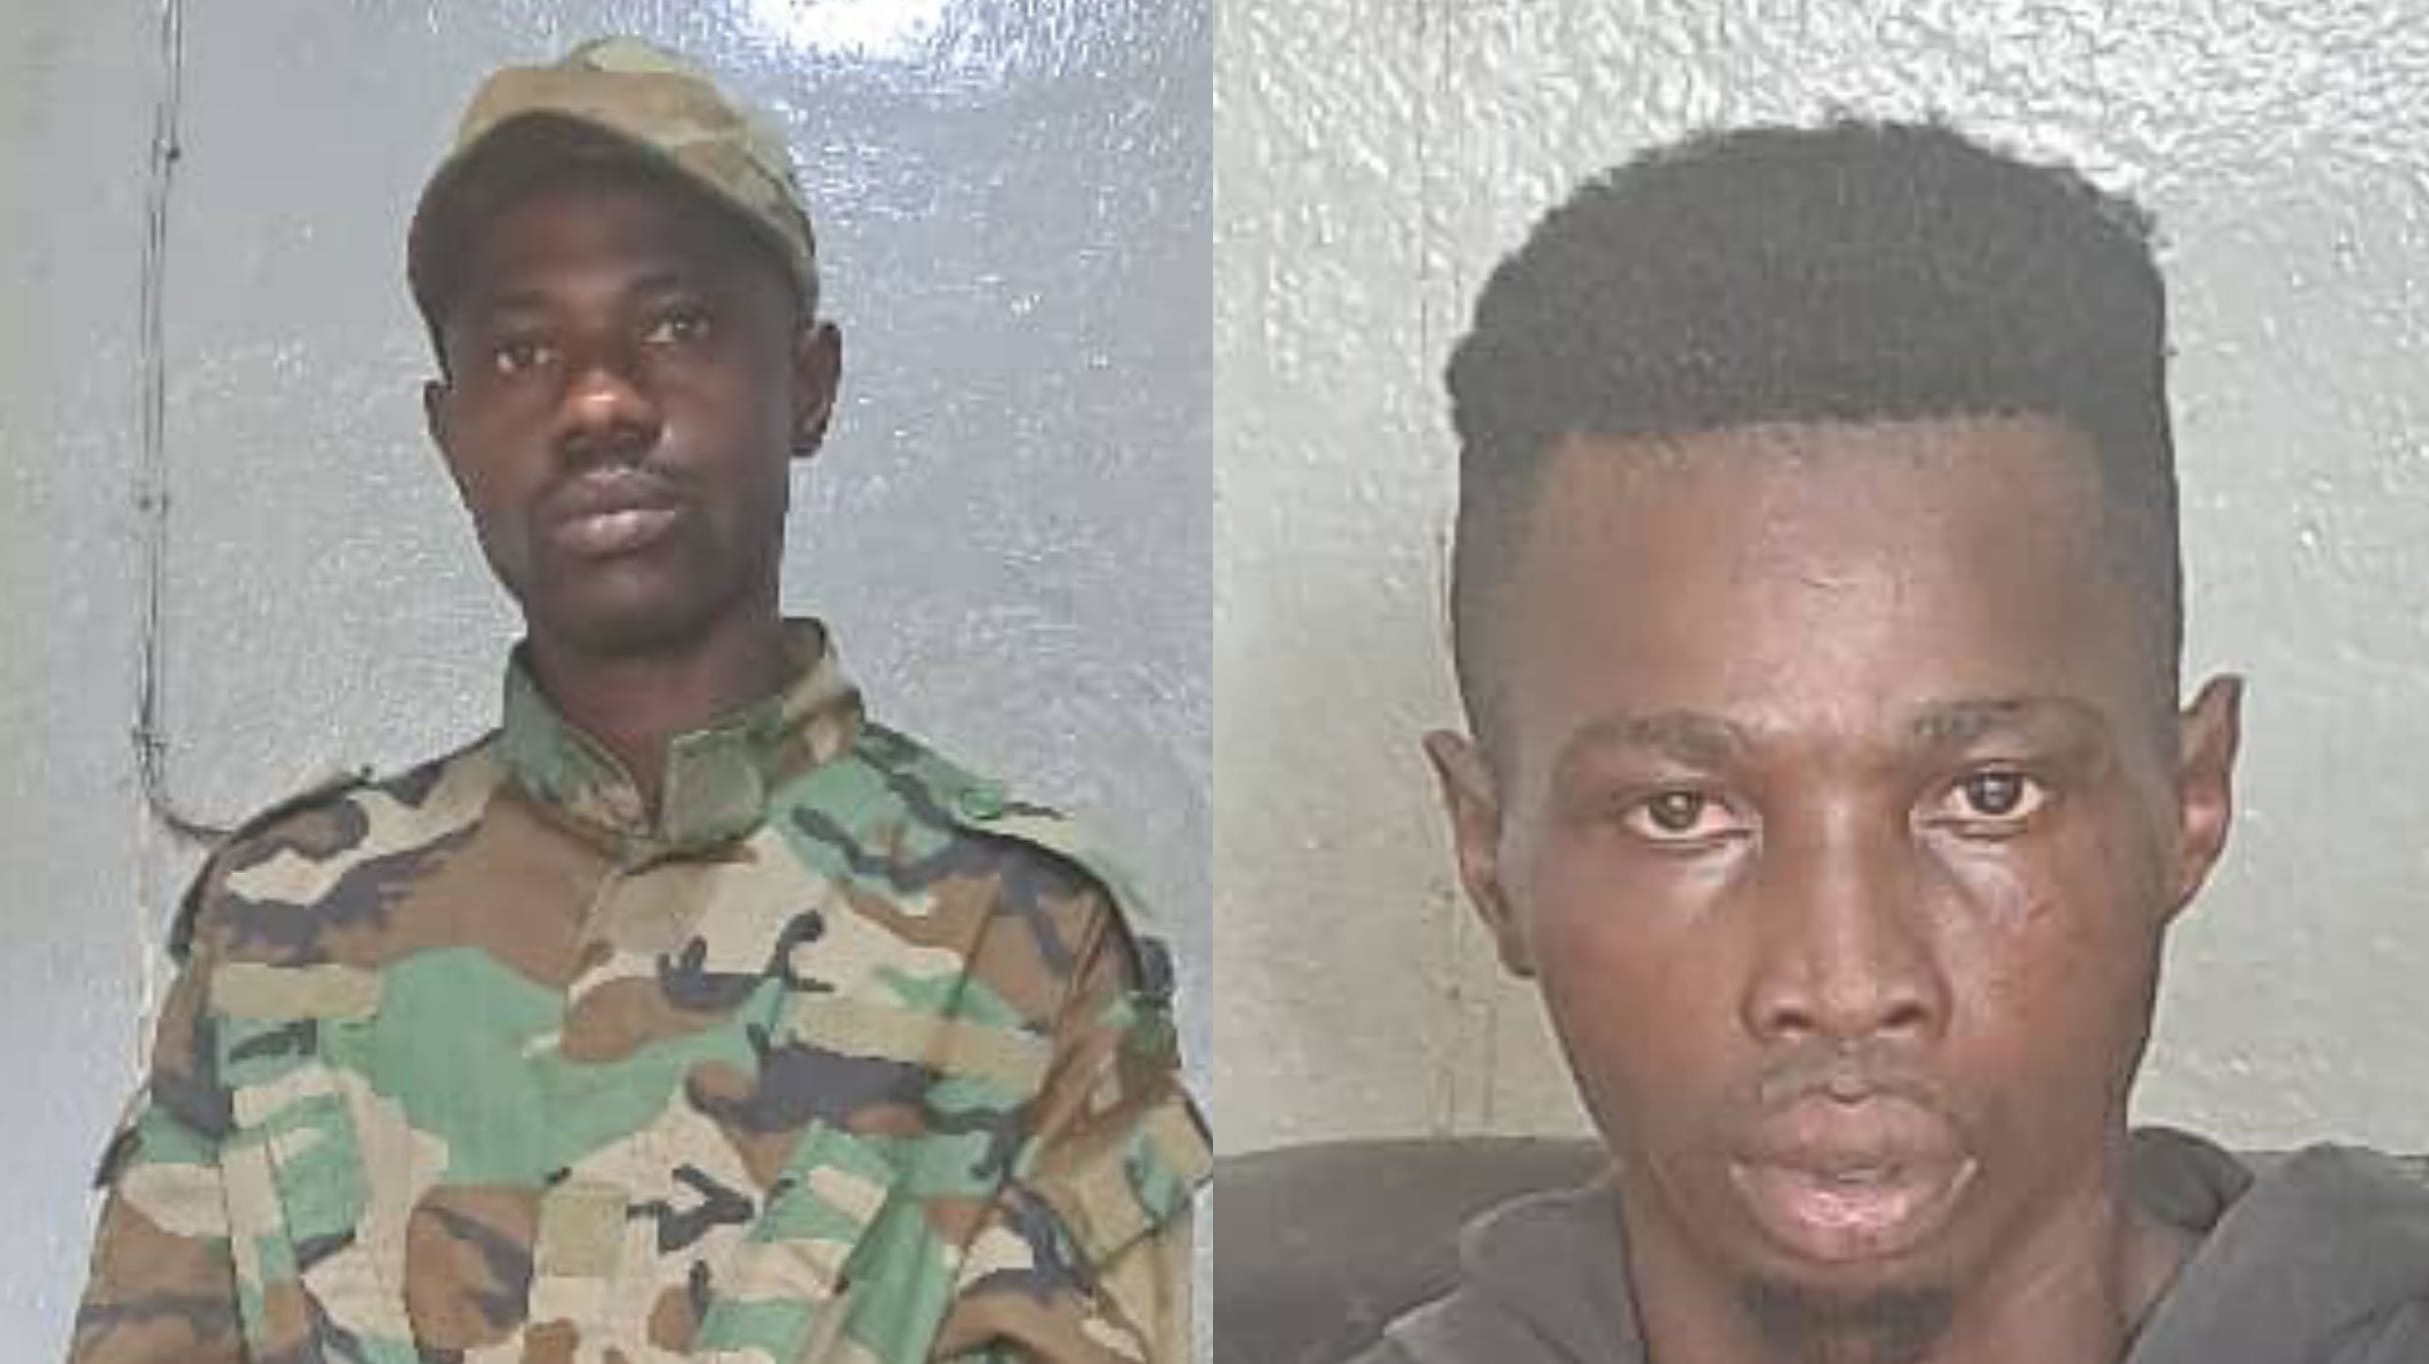 Sierra Leone Police Arrest Two For Military Impersonation And Firearm Possession